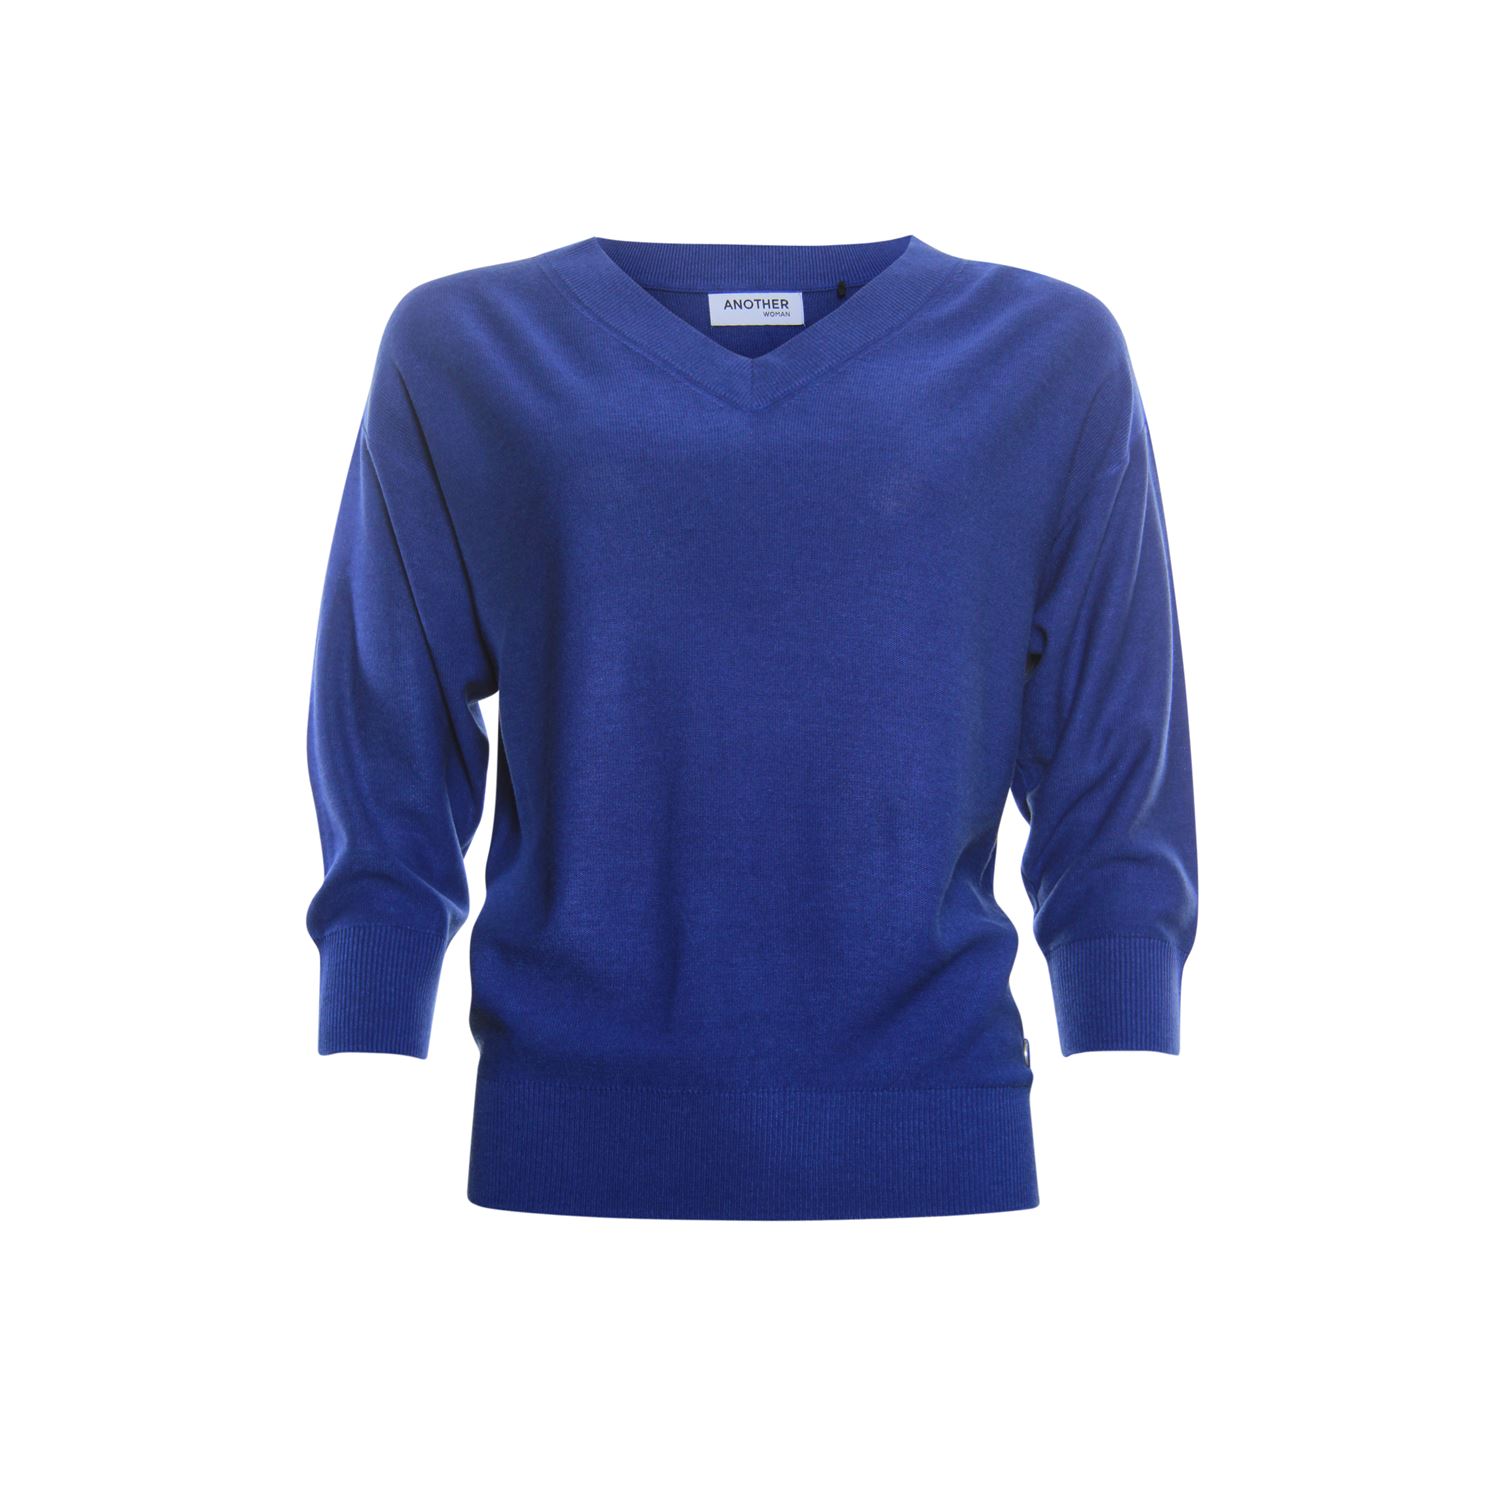 Anotherwoman Pullover v-neck - Shop Anotherwoman women's clothing